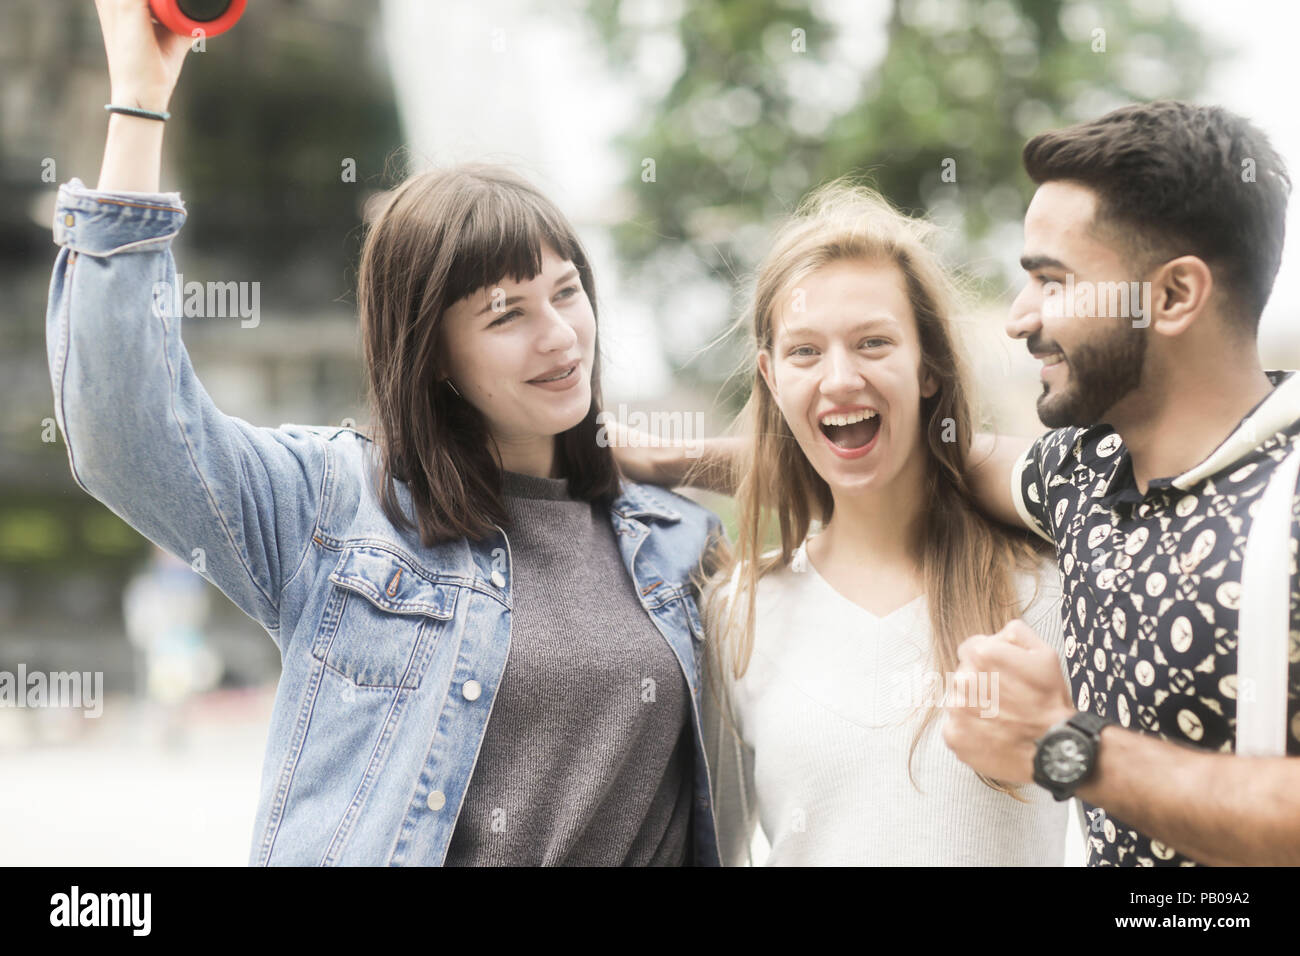 Three friends with their arms around each other listening to music Stock Photo